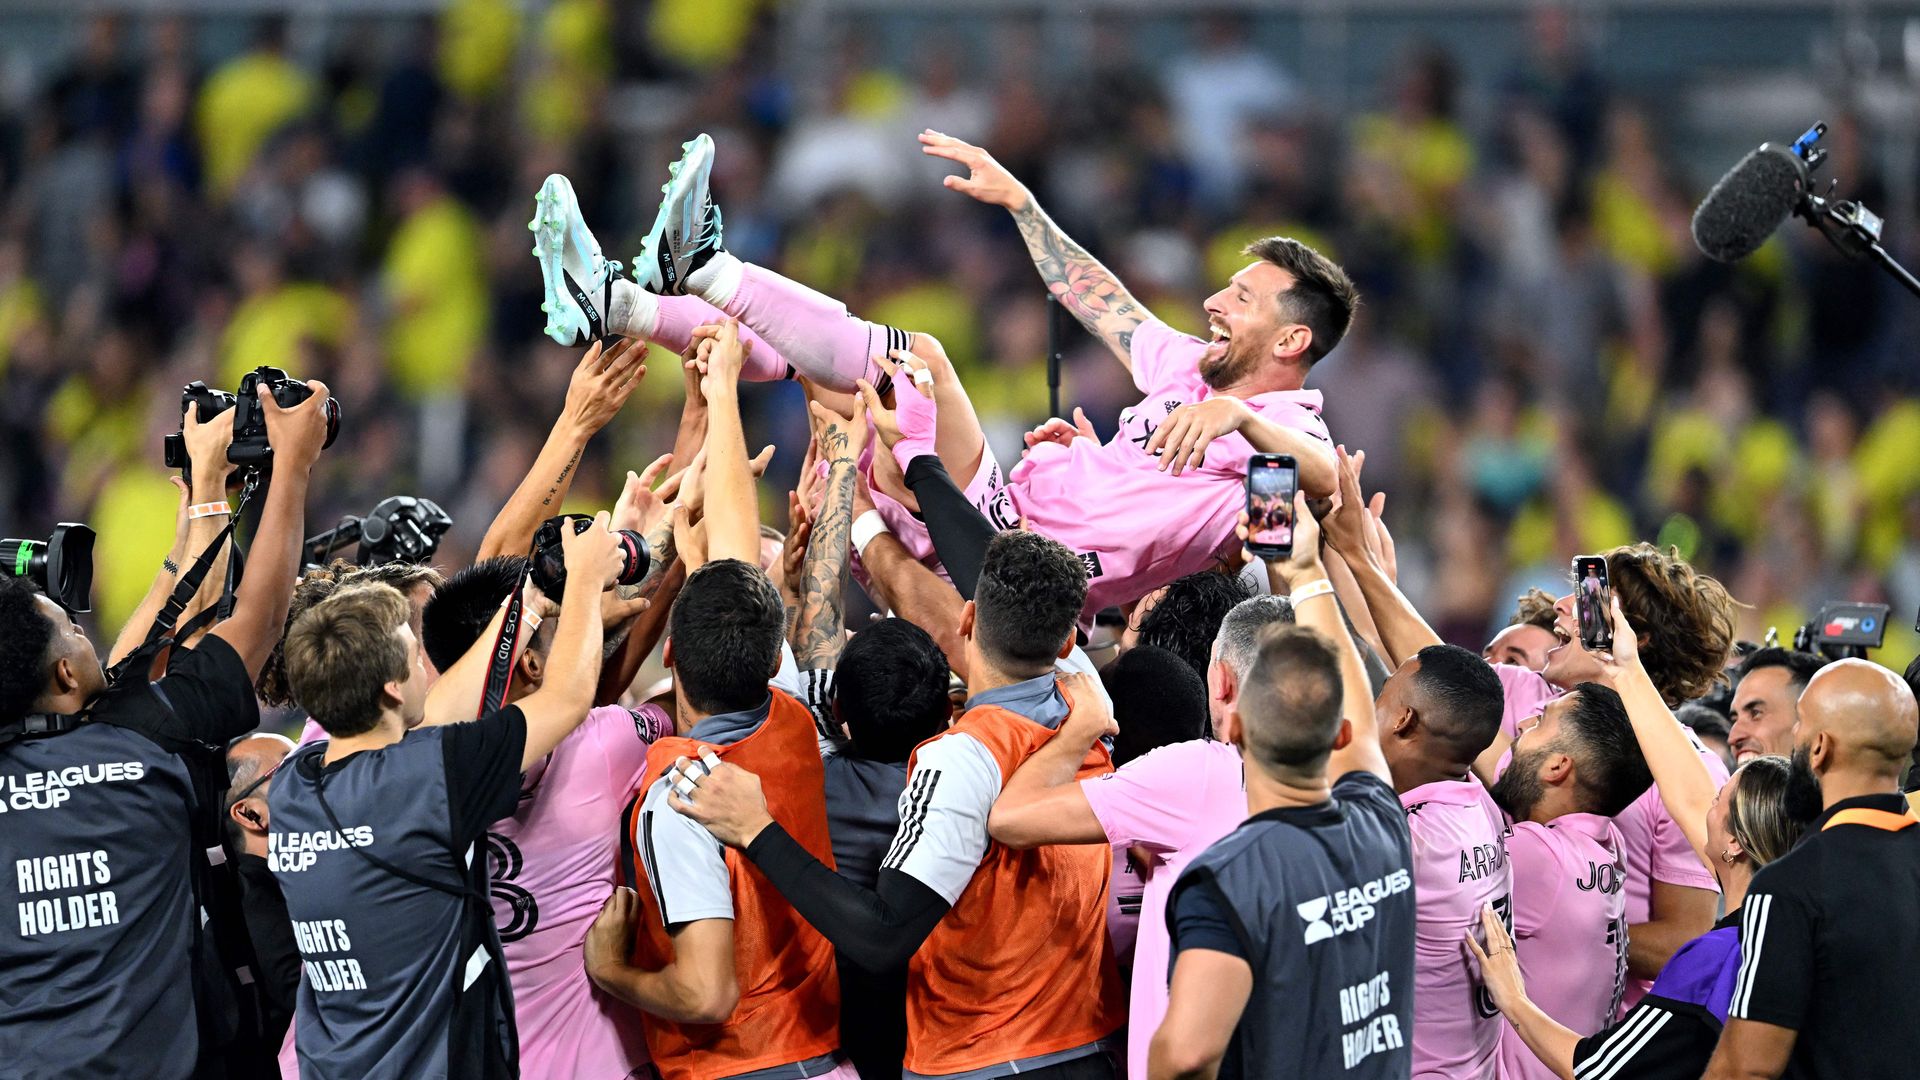 Teammates hold up Inter Miami's Argentine forward #10 Lionel Messi as they celebrate after winning the Leagues Cup final football match against Nashville SC 